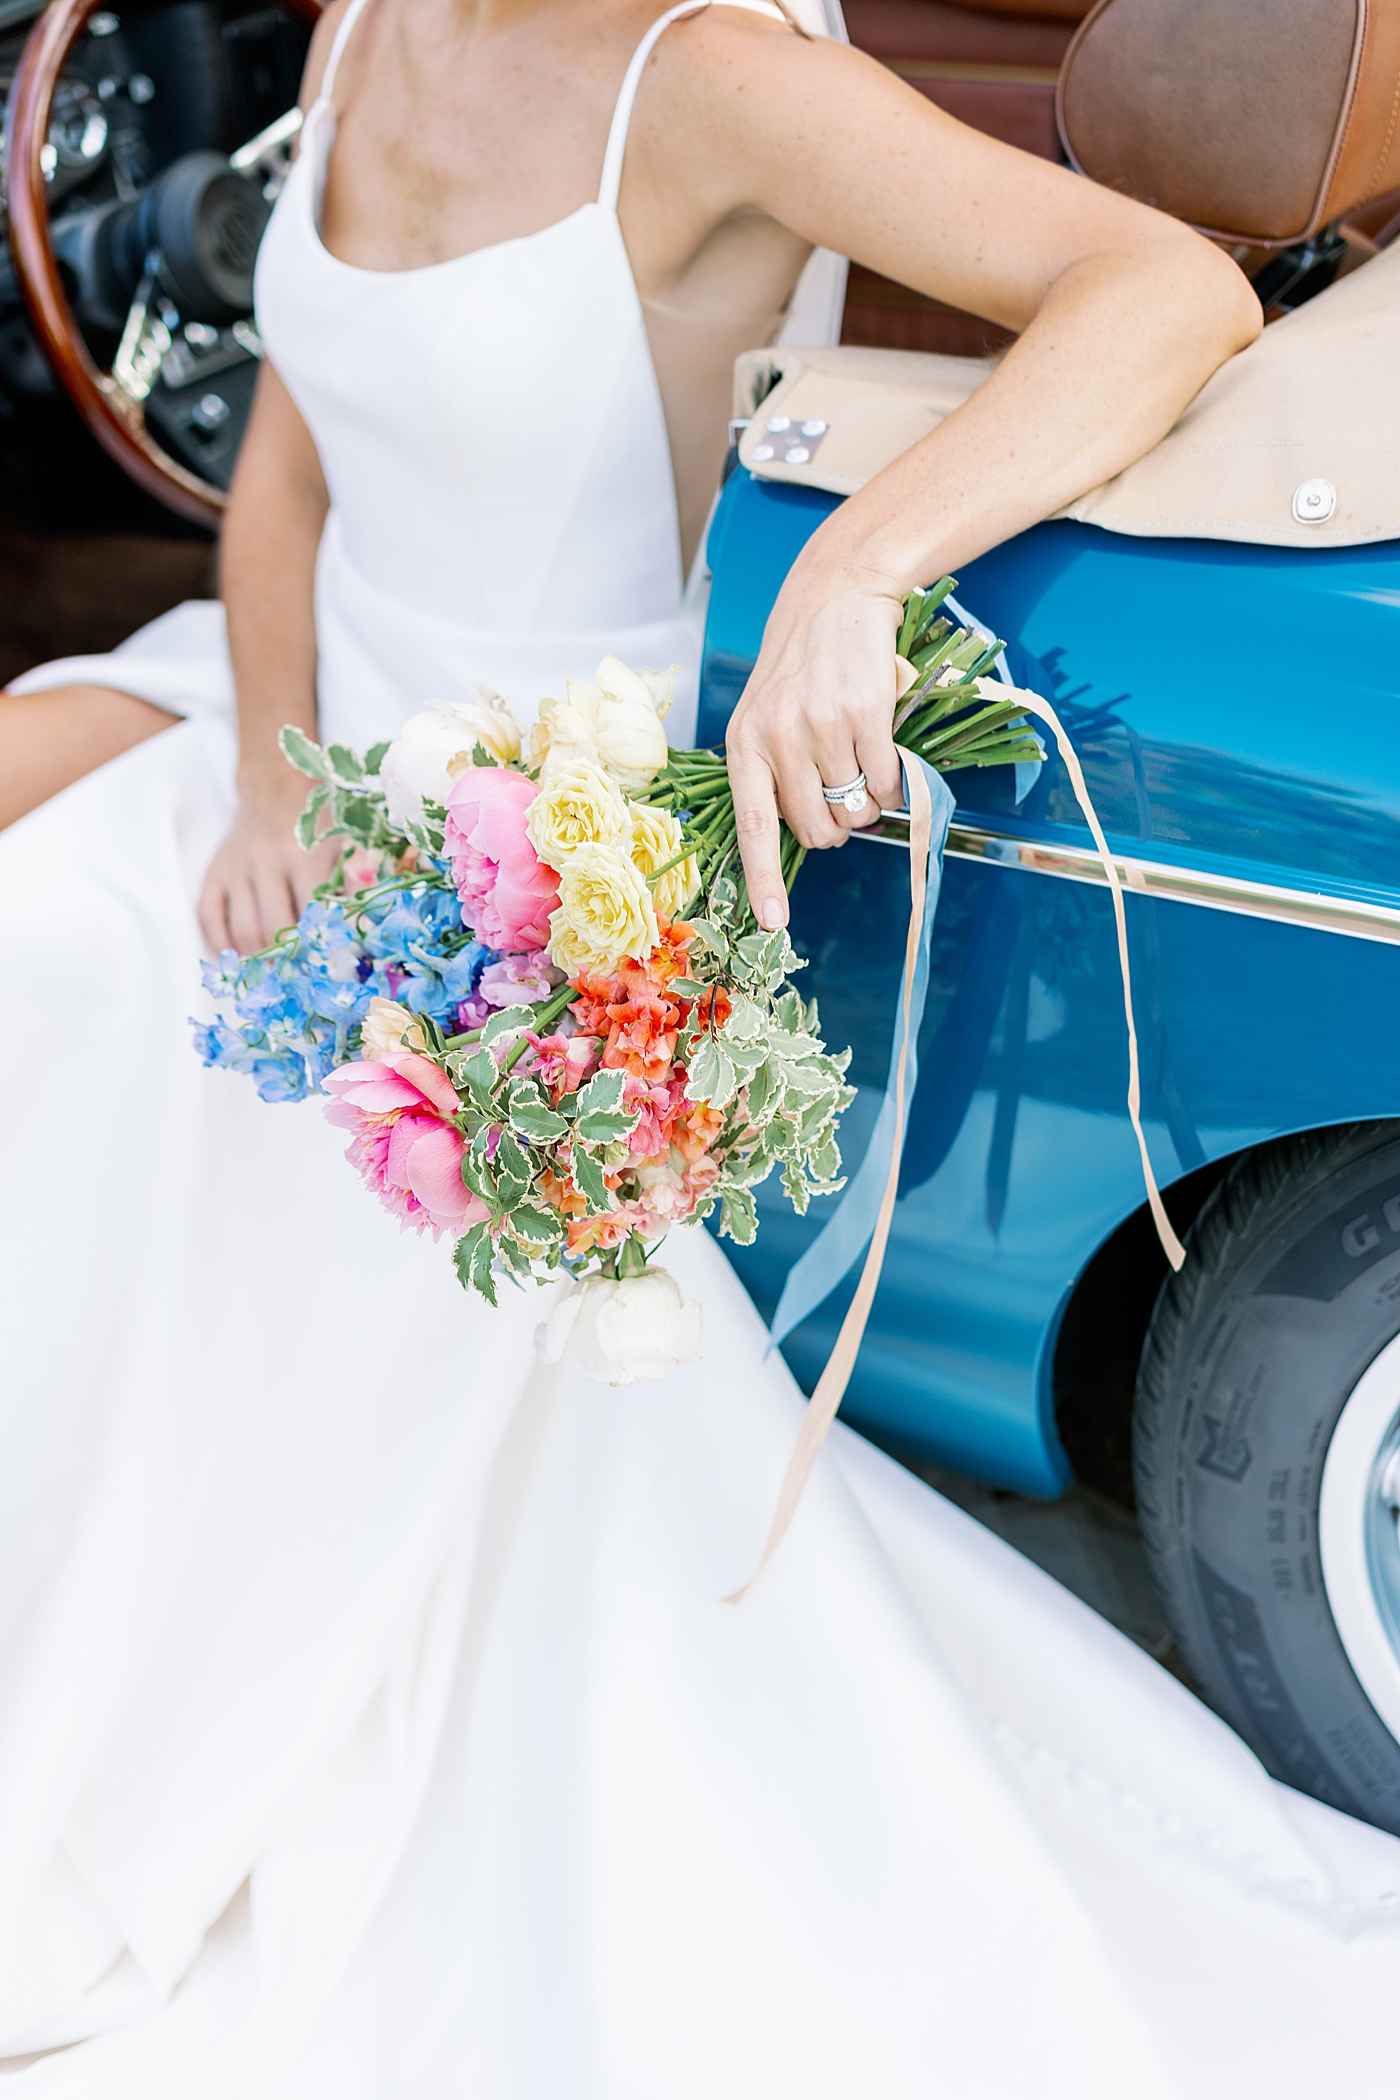 Bride sitting in a blue antique car holding her bouquet | Photo by Annie Laura Photo